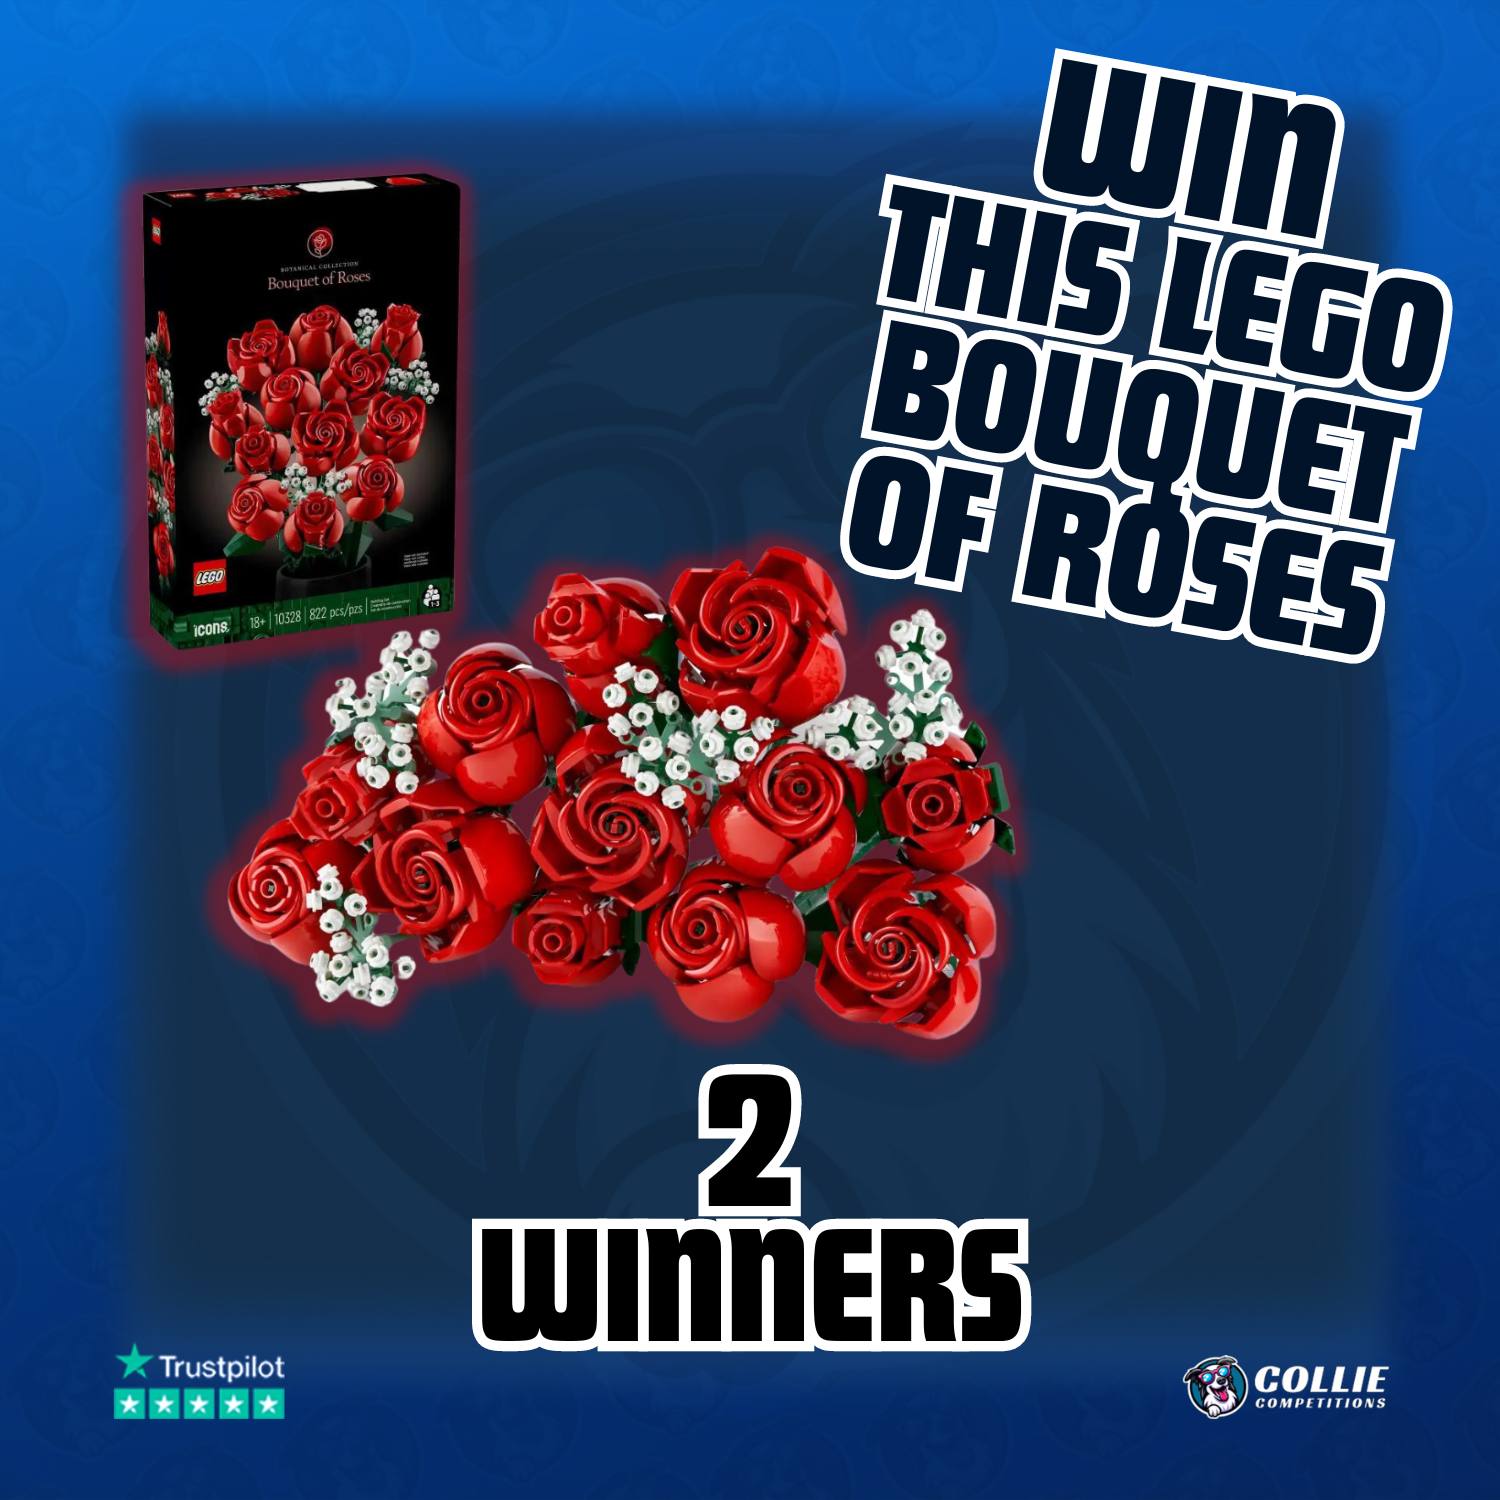 Lego Bouquet of Roses - 2 Winners #1